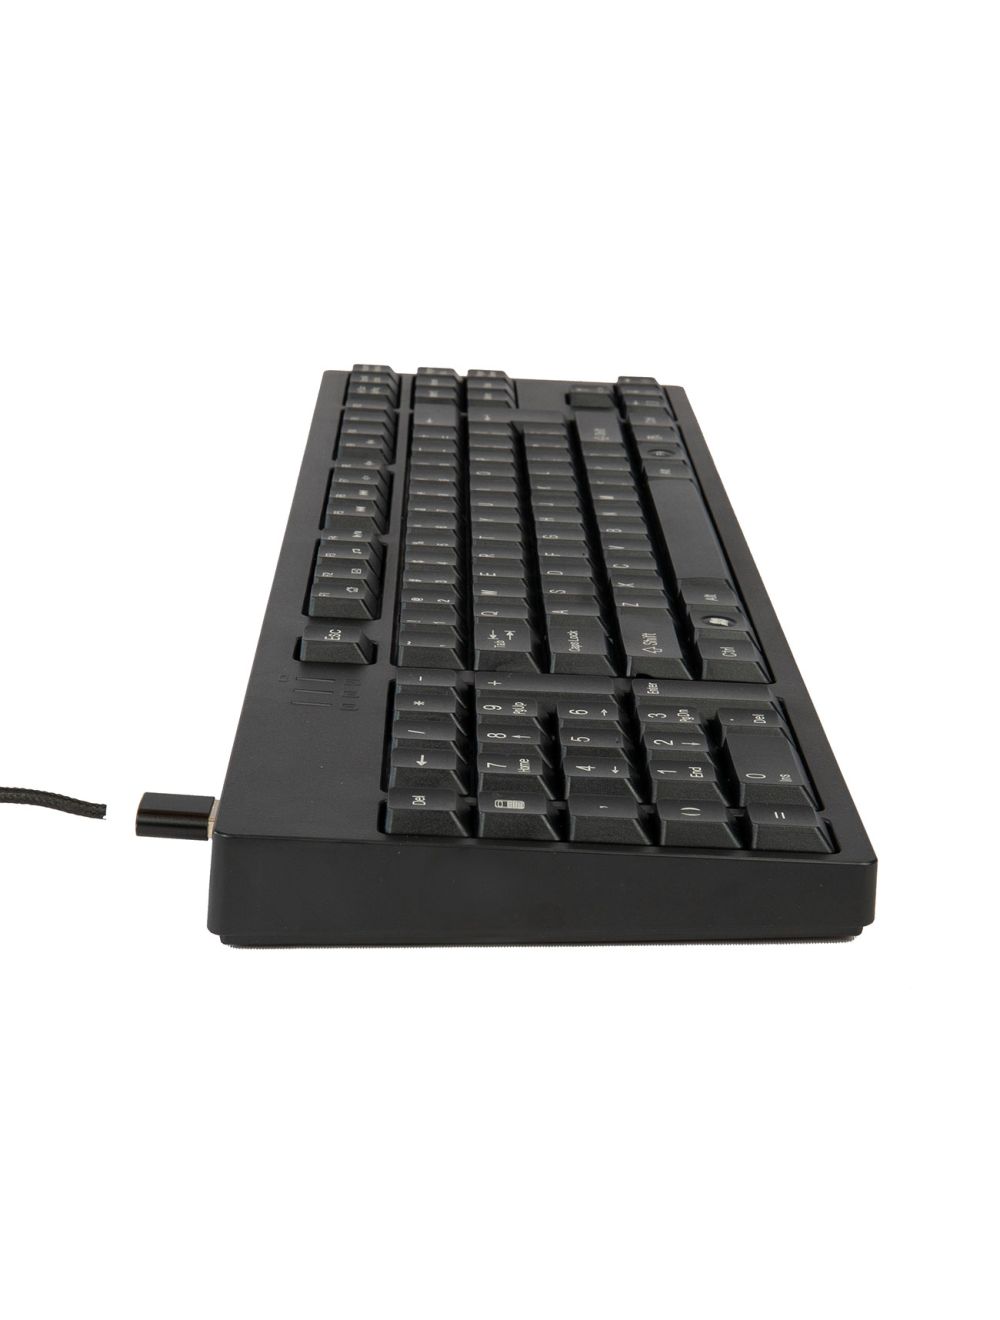 Keyboard with Keypad on the left